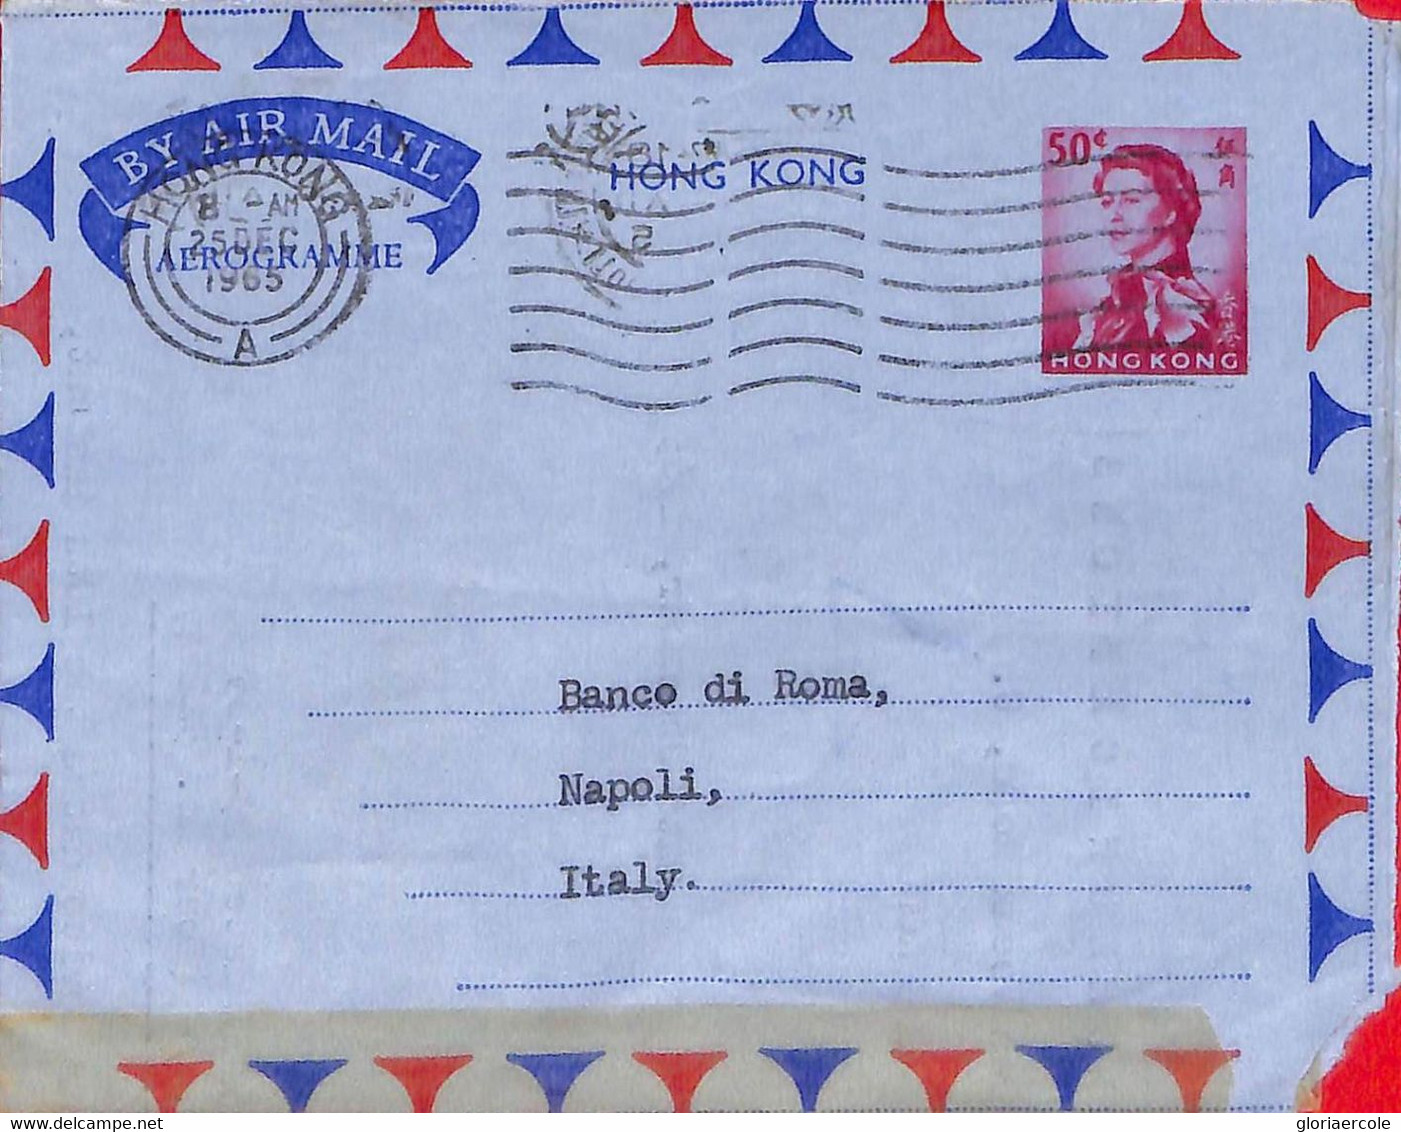 Aa6791 - HONG KONG - POSTAL HISTORY - Stationery AEROGRAMME  To ITALY  1965 - Entiers Postaux